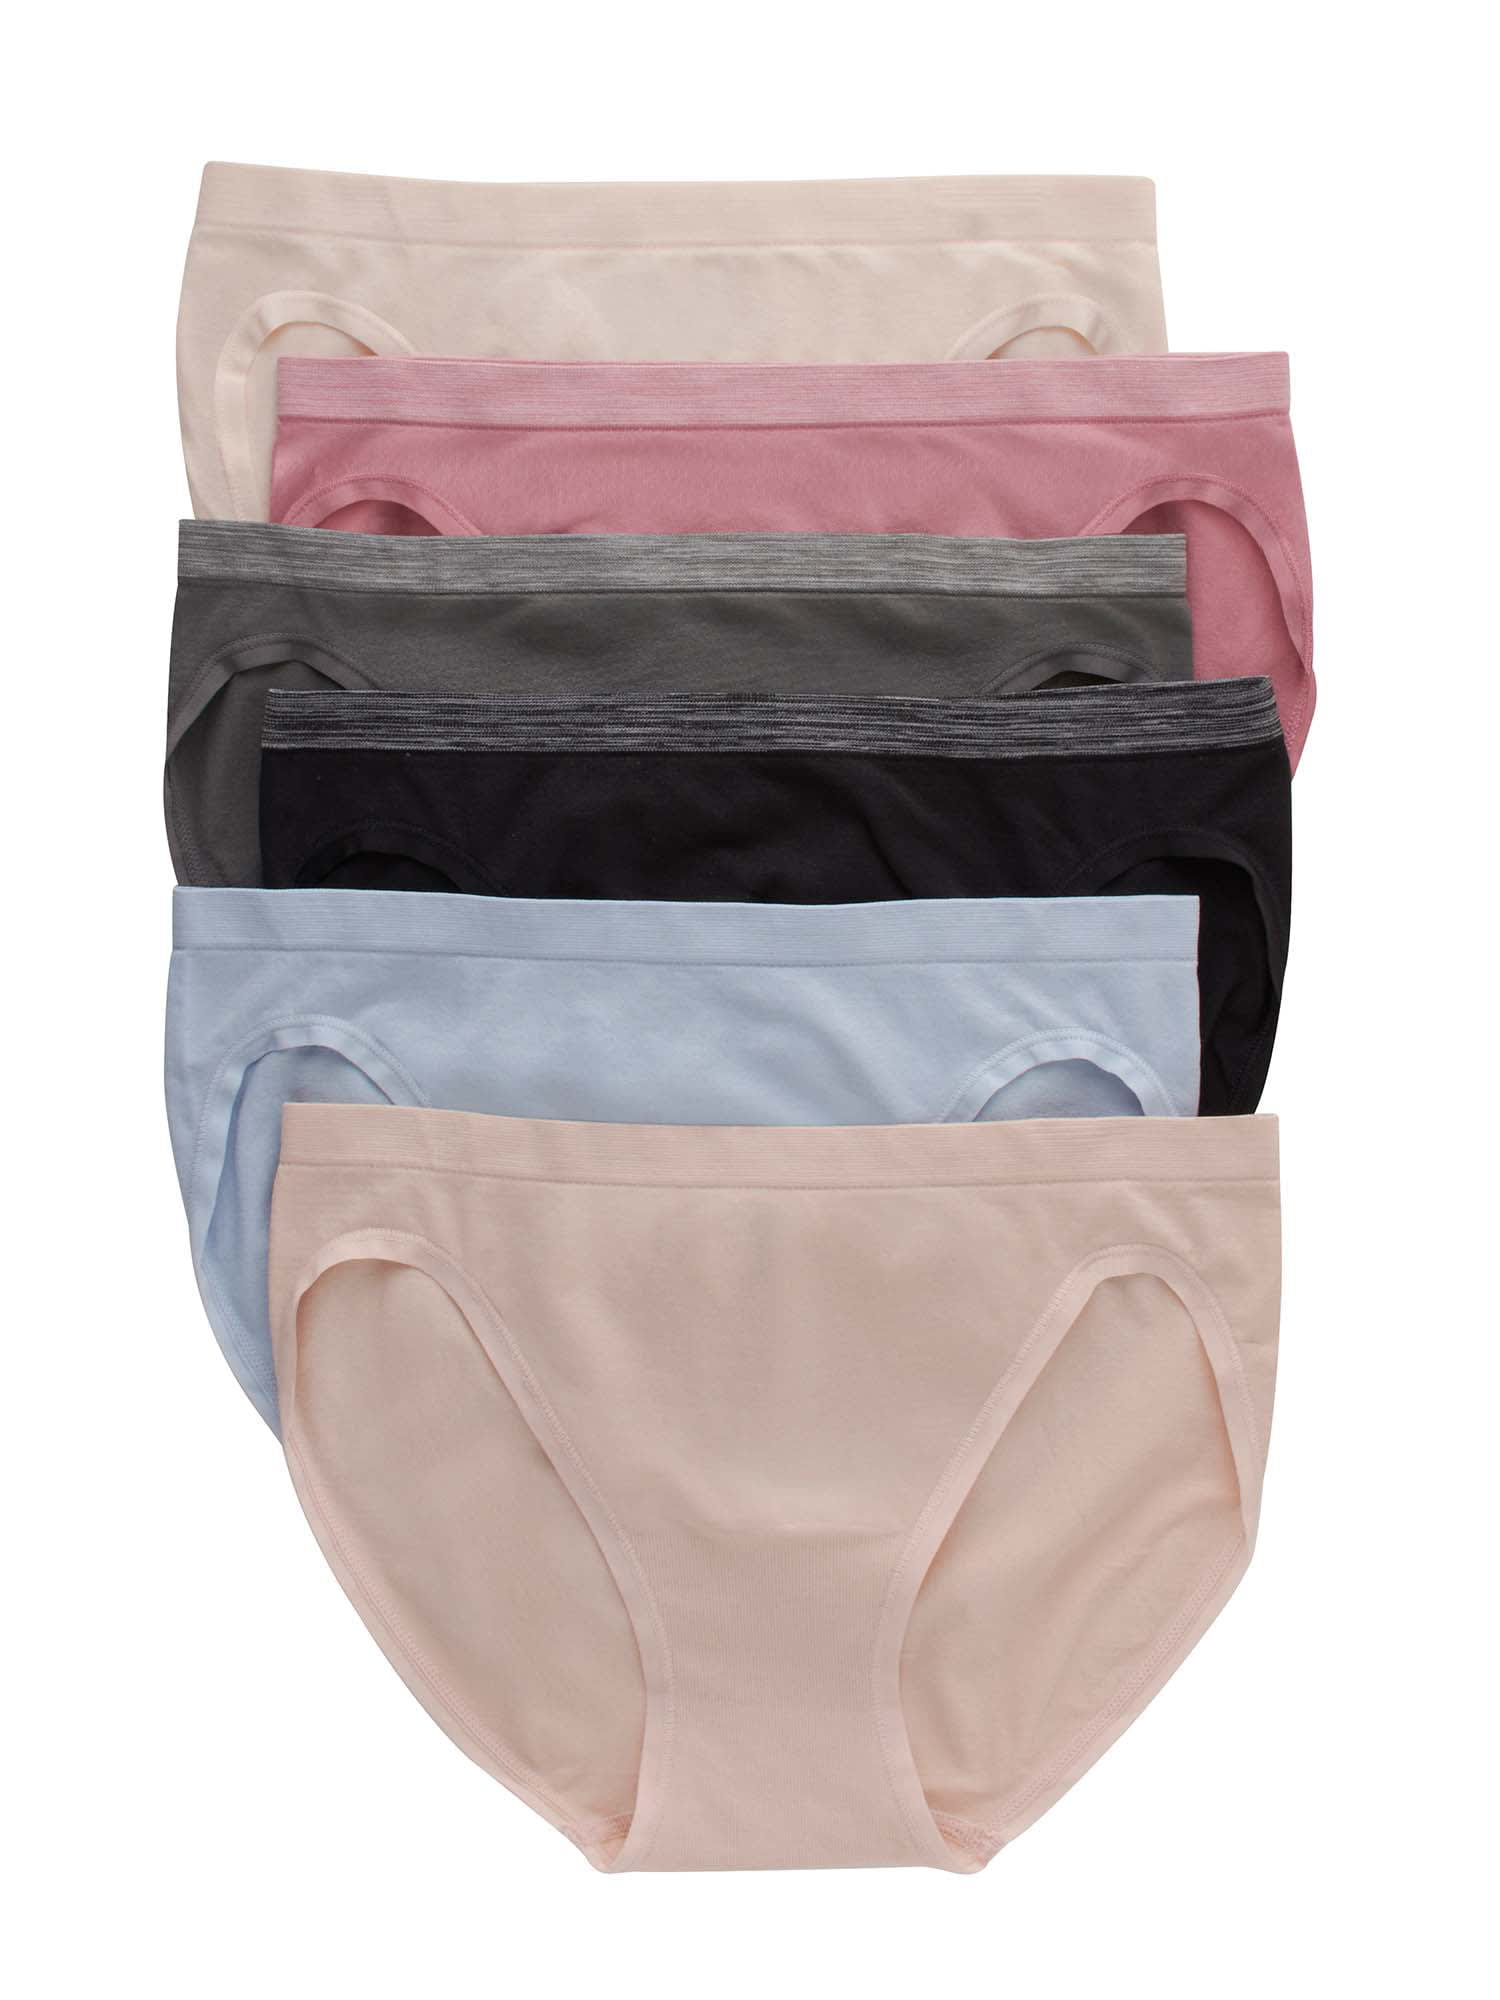 Fruit of the Loom Women's Low-Rise Brief Underwear, 6 Pack, Sizes